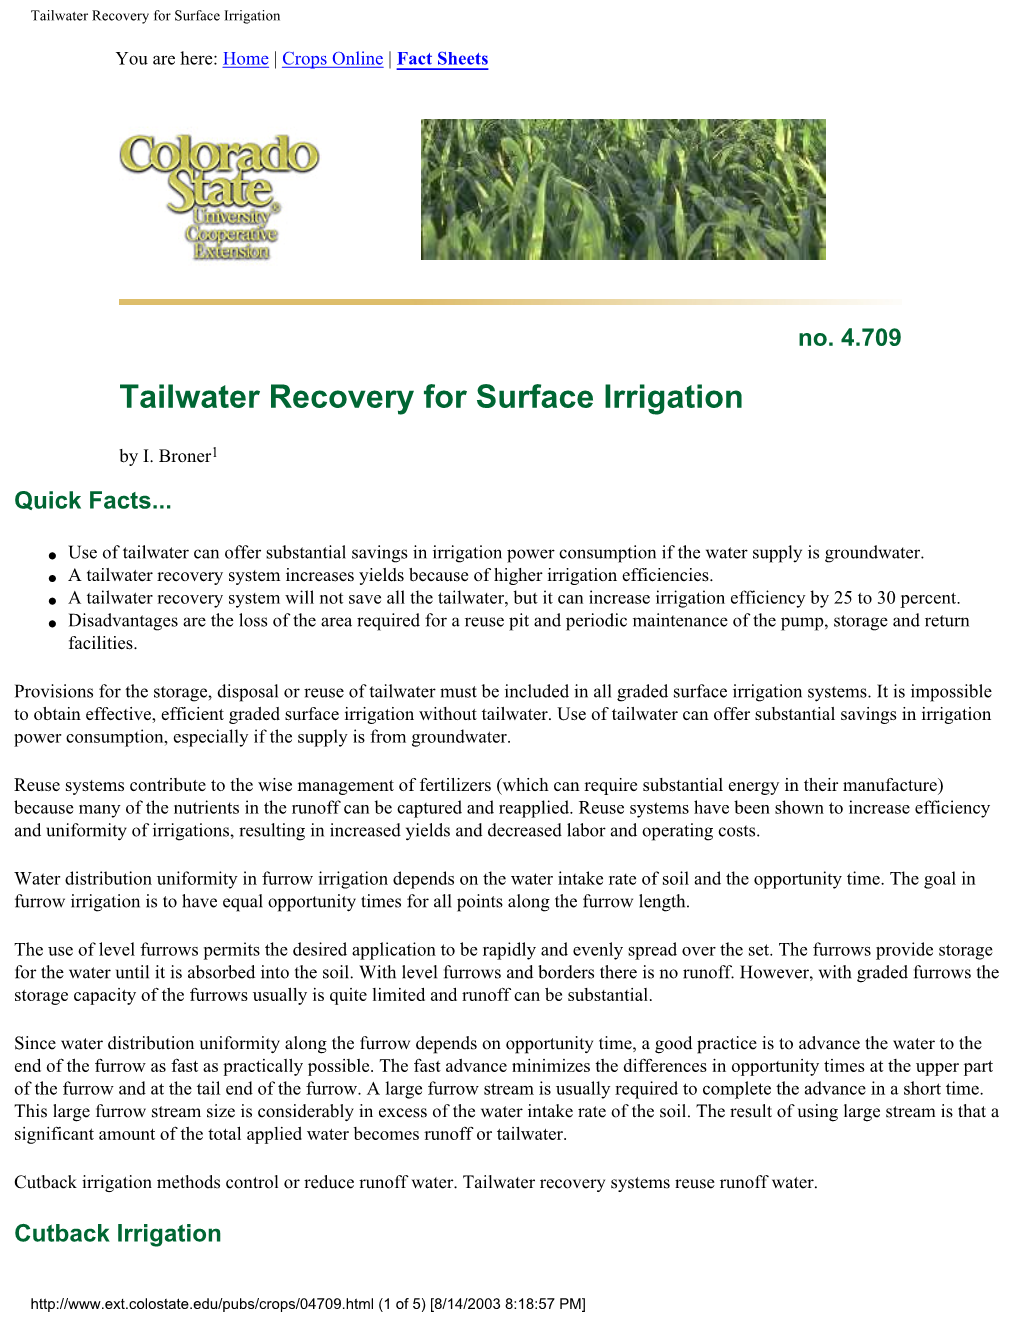 Tailwater Recovery for Surface Irrigation